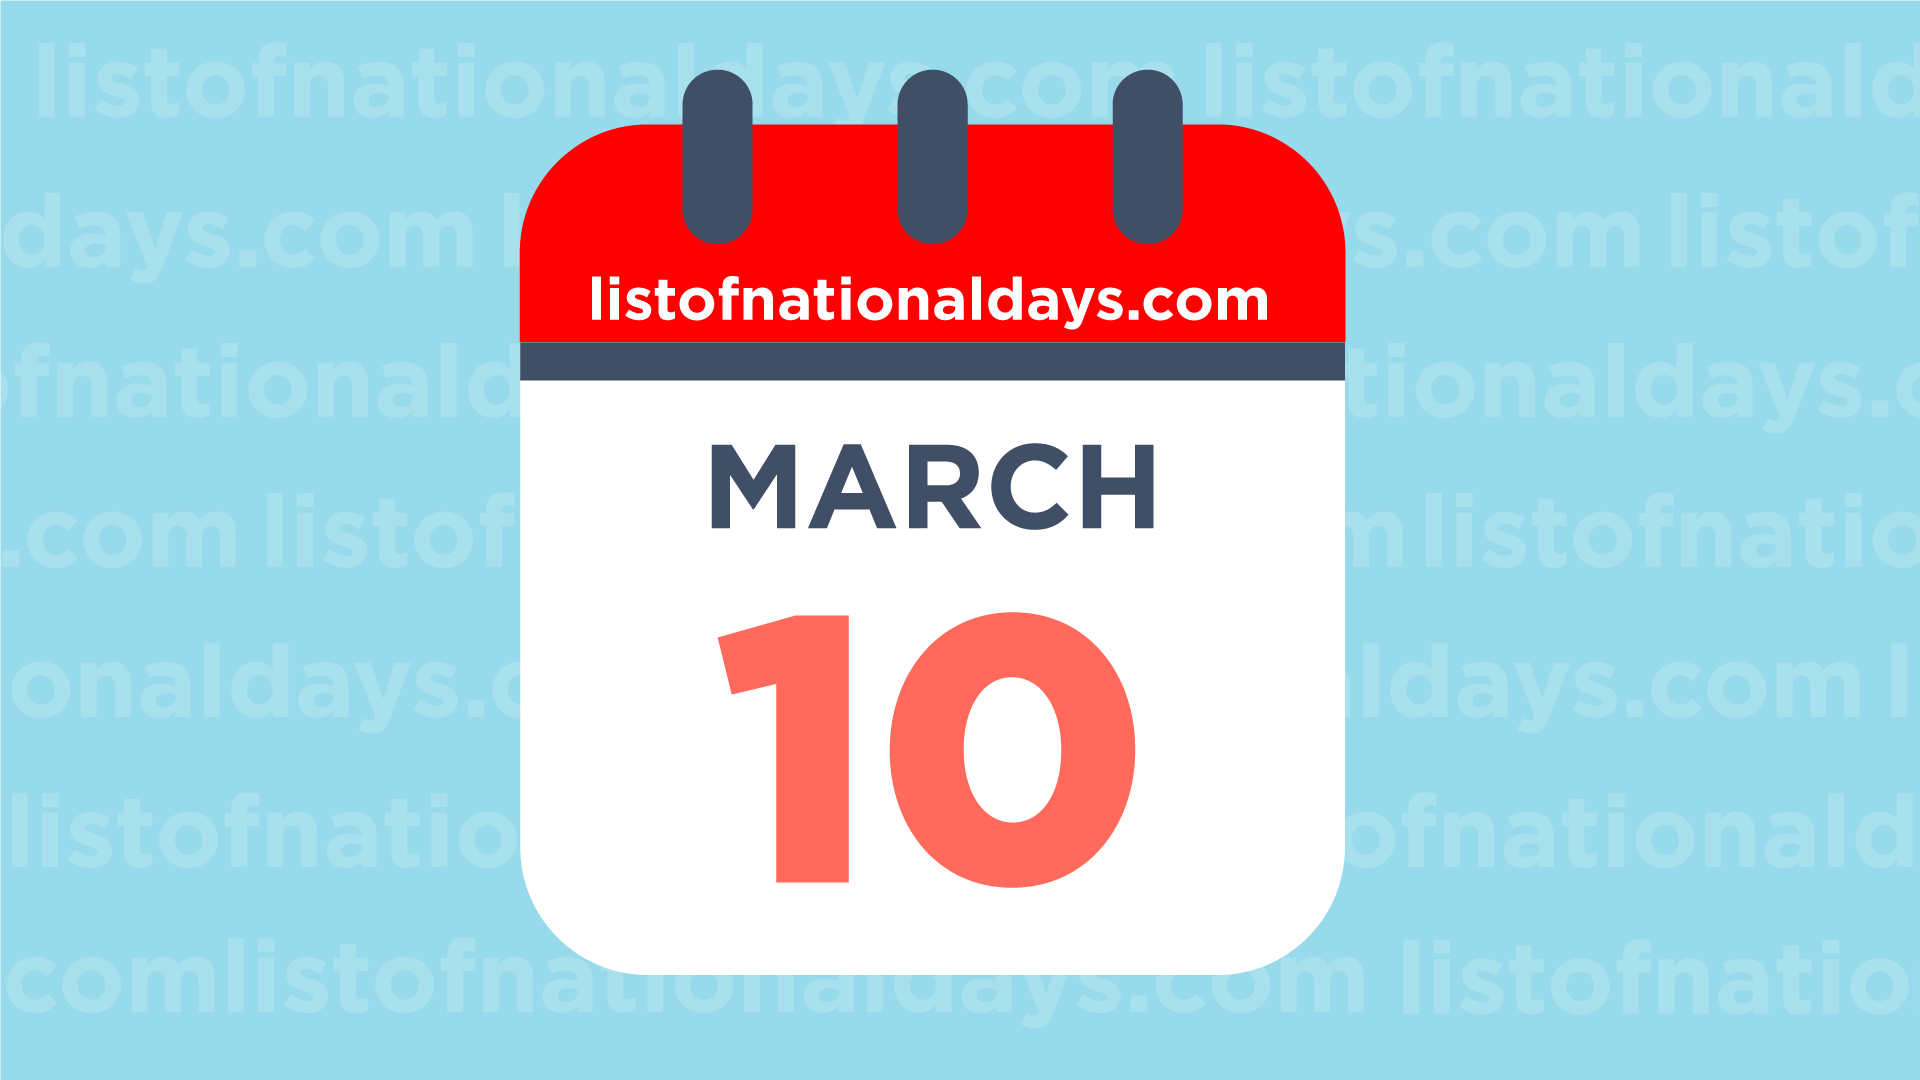 MARCH 10TH National Holidays,Observances & Famous Birthdays